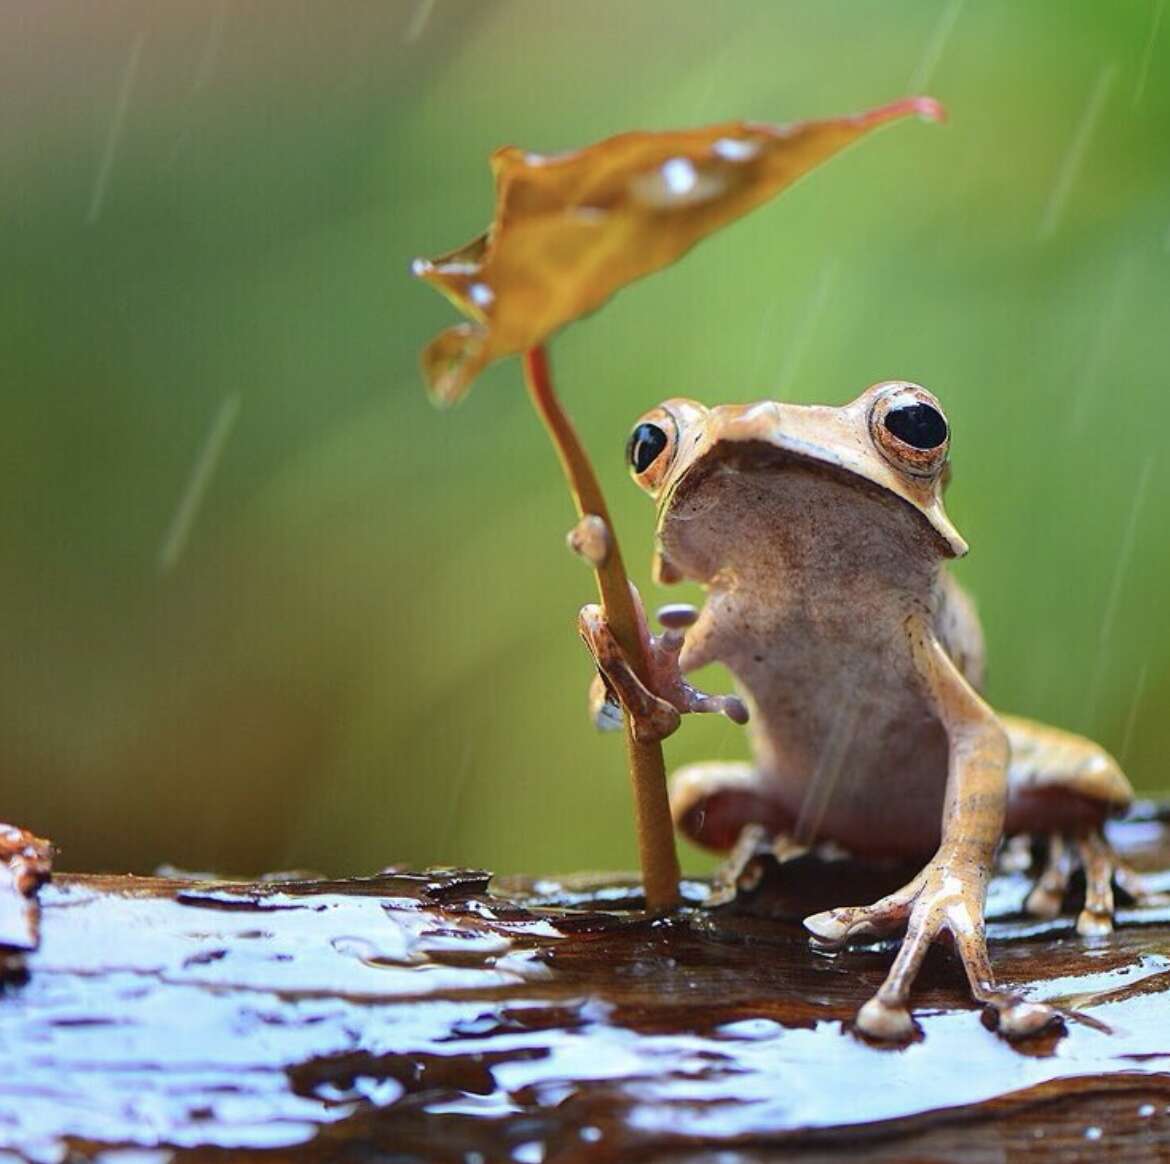 Frog hides from rain